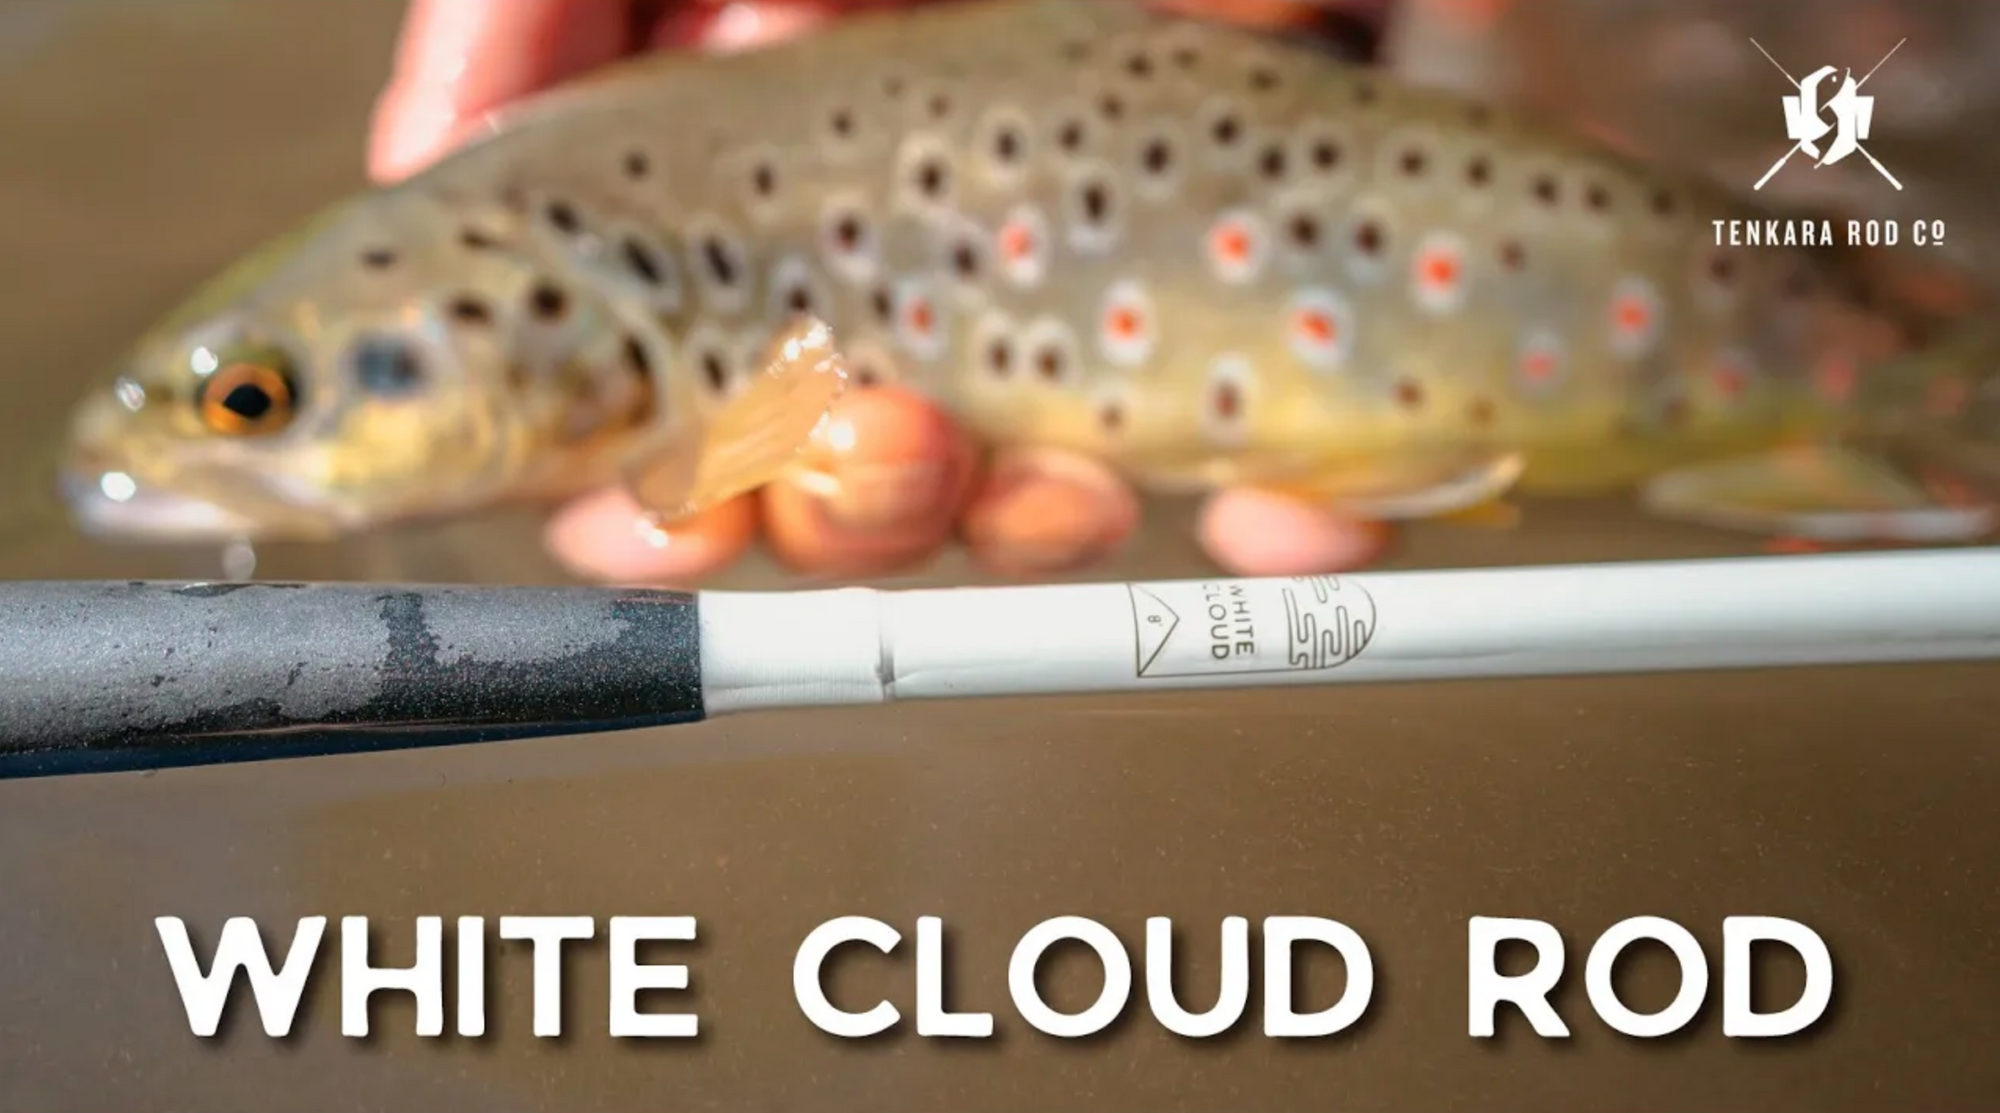 The White Cloud Rod